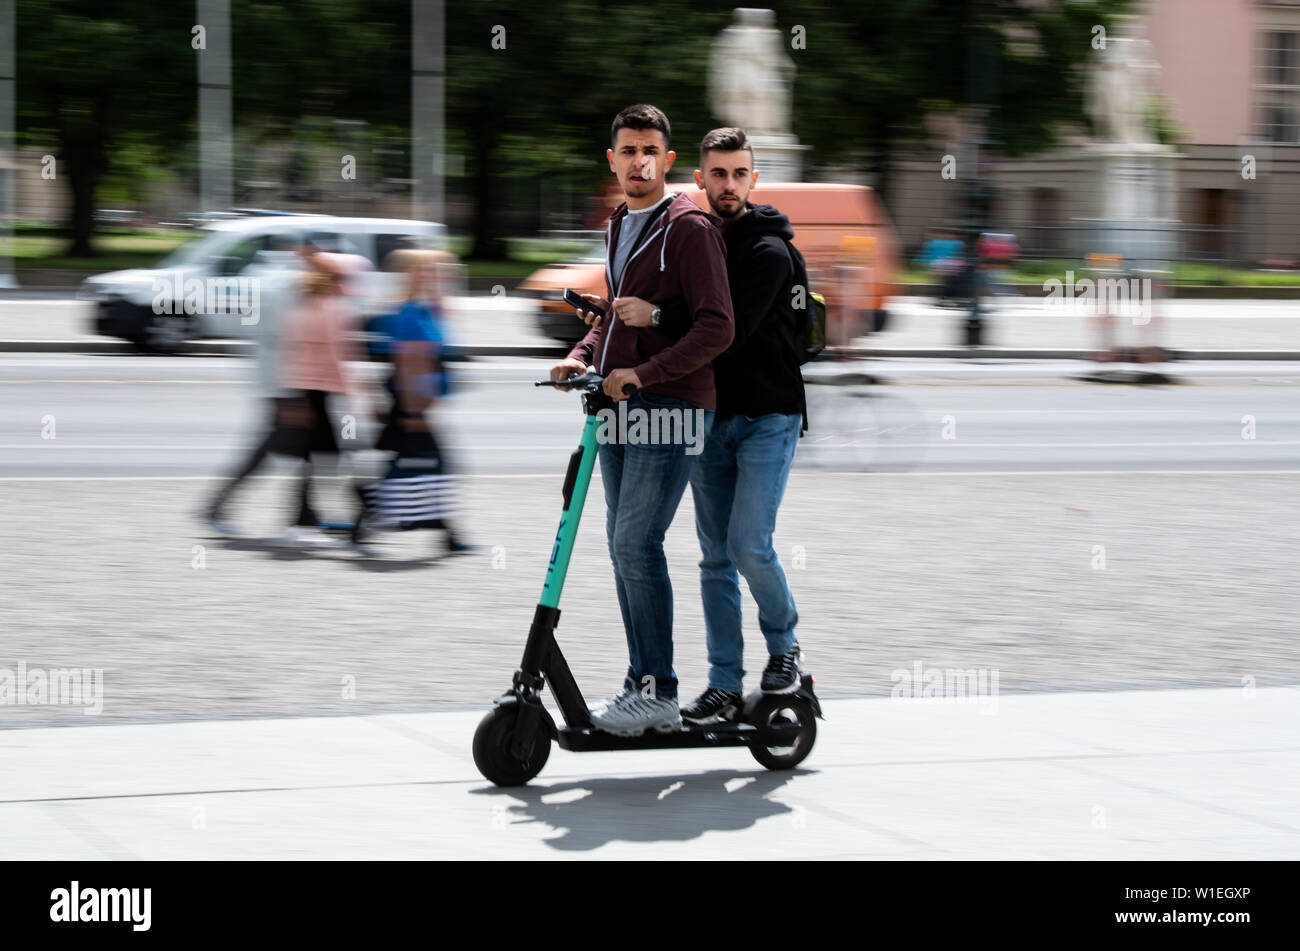 02-july-2019-berlin-two-tourists-from-wuppertal-nrw-drive-on-an-electric-scooter-through-berlin-mitte-after-the-new-electric-pedal-scooters-were-allowed-the-berlin-police-have-already-established-a-whole-series-of-violations-of-the-road-traffic-regulations-the-police-expressly-appeal-to-the-drivers-to-familiarise-themselves-with-the-scooter-before-starting-into-traffic-photo-bernd-von-jutrczenkadpa-W1EGXP.jpg